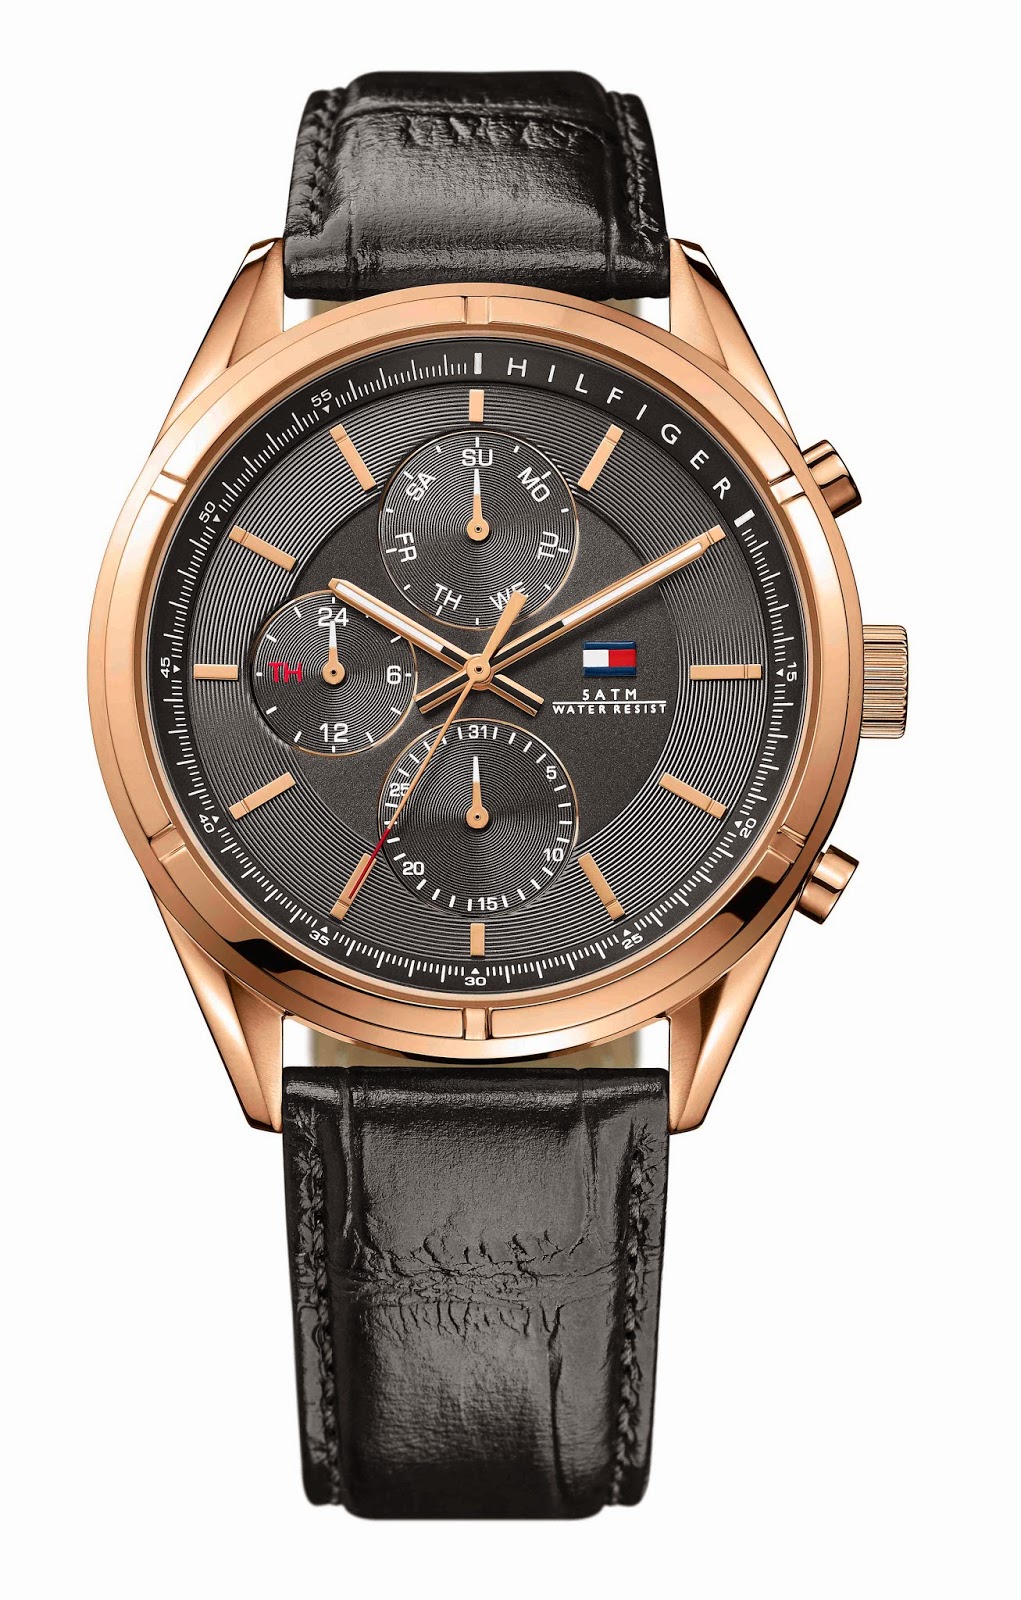 men's styling: ROSE-GOLD MENS WATCH HEADLINES TOMMY WATCHES NEW SS15